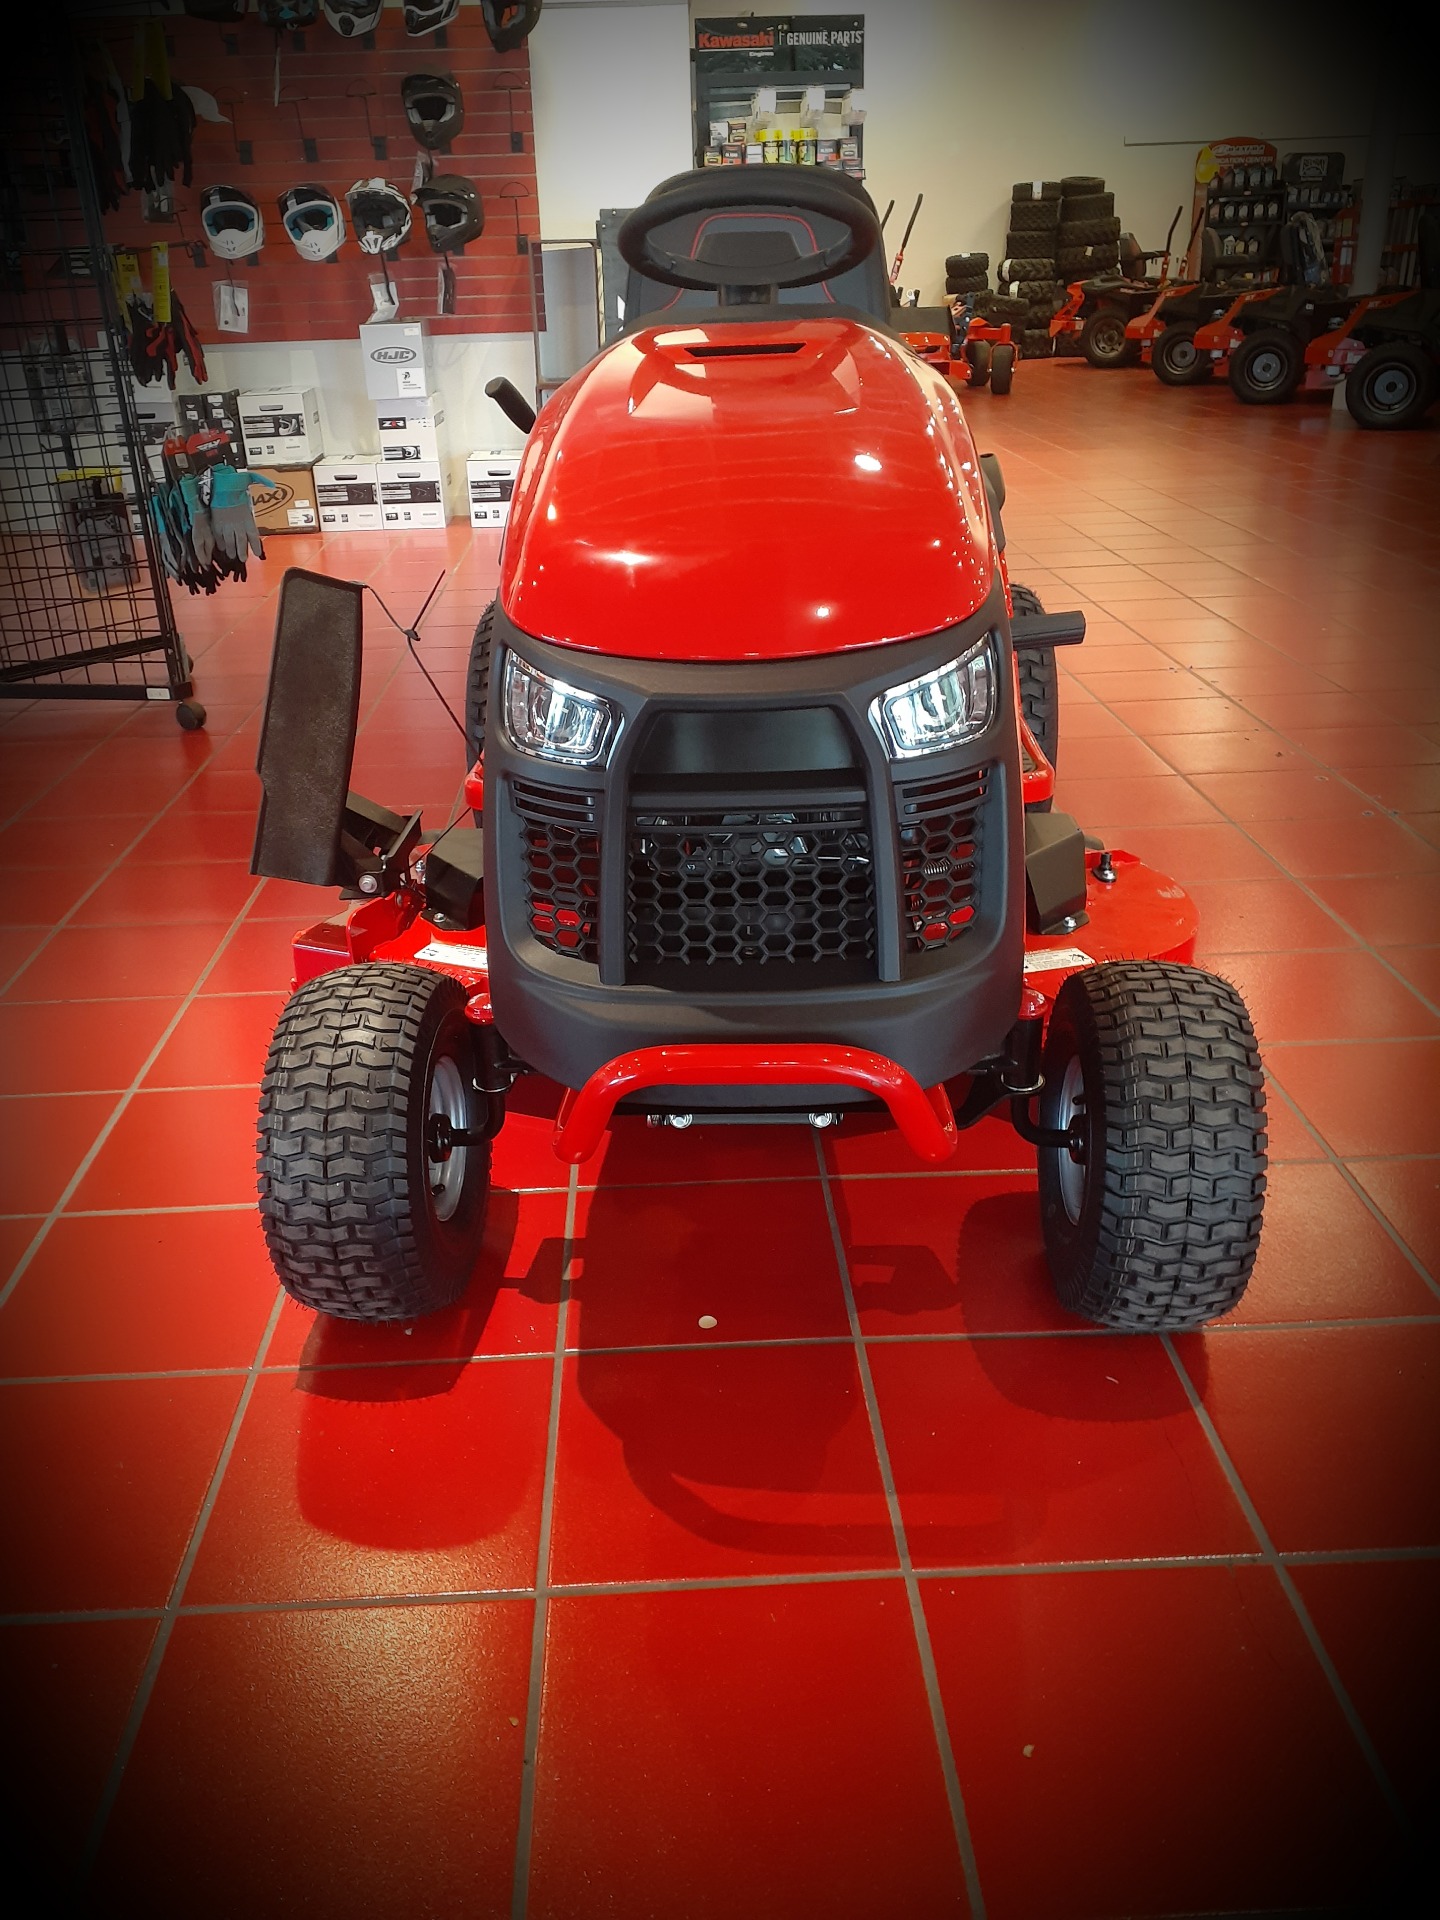 2021 Snapper SPX 48 in. Briggs & Stratton Professional 25 hp in Lafayette, Indiana - Photo 5